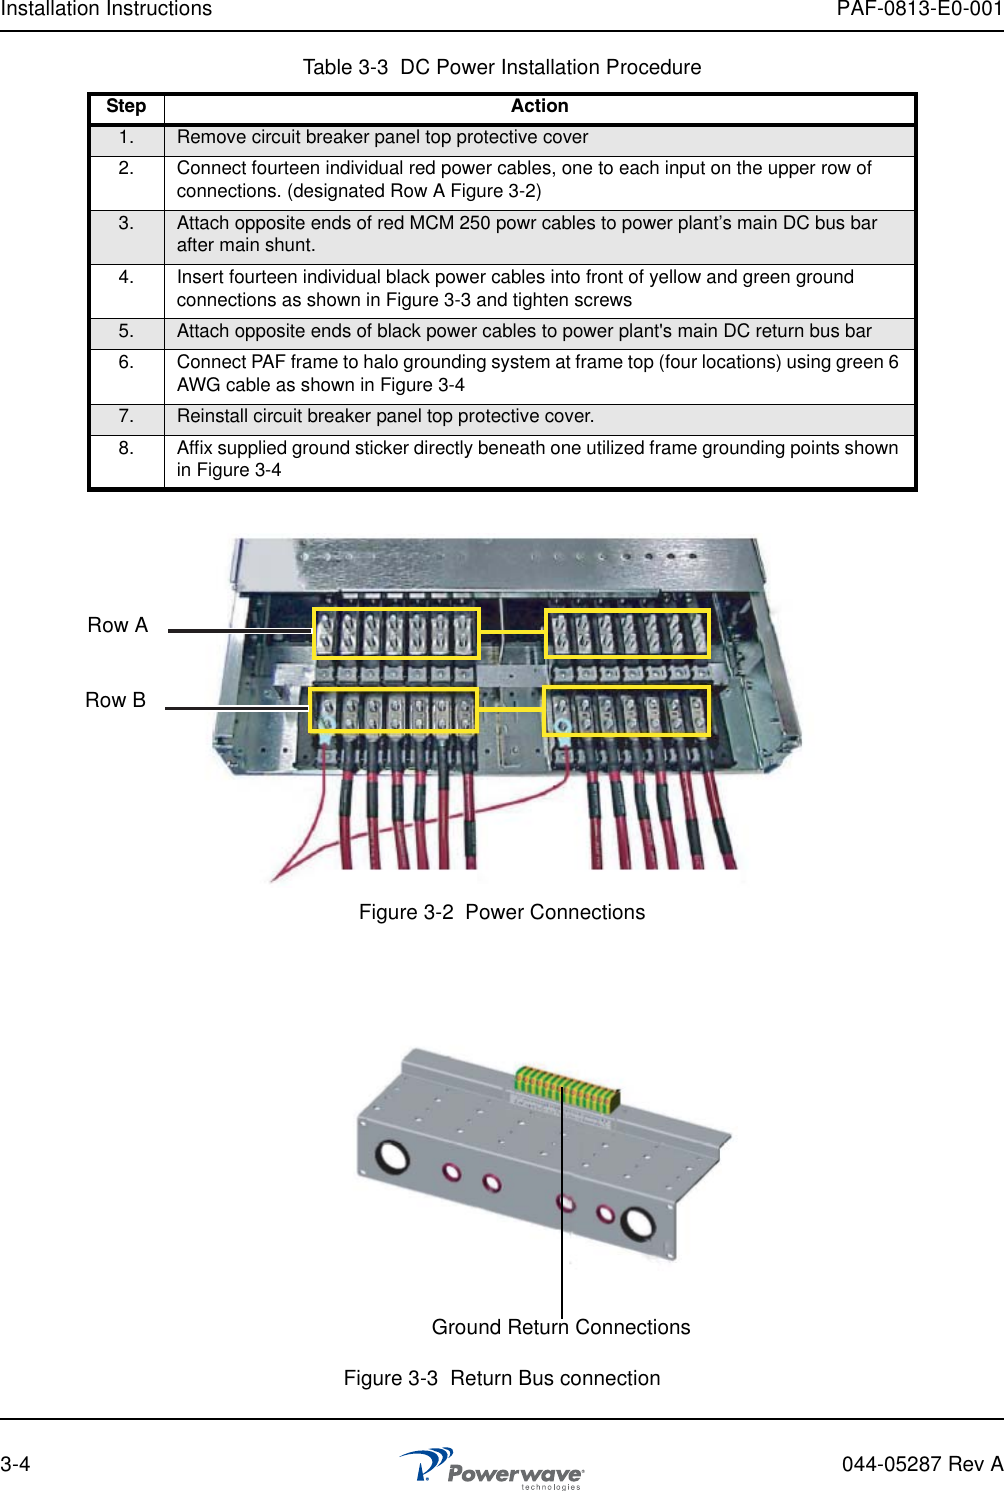 Installation Instructions PAF-0813-E0-0013-4 044-05287 Rev AFigure 3-2  Power ConnectionsFigure 3-3  Return Bus connectionTable 3-3  DC Power Installation ProcedureStep Action1. Remove circuit breaker panel top protective cover2. Connect fourteen individual red power cables, one to each input on the upper row of connections. (designated Row A Figure 3-2)3. Attach opposite ends of red MCM 250 powr cables to power plant’s main DC bus bar after main shunt.4. Insert fourteen individual black power cables into front of yellow and green ground connections as shown in Figure 3-3 and tighten screws5. Attach opposite ends of black power cables to power plant&apos;s main DC return bus bar6. Connect PAF frame to halo grounding system at frame top (four locations) using green 6 AWG cable as shown in Figure 3-47. Reinstall circuit breaker panel top protective cover.8. Affix supplied ground sticker directly beneath one utilized frame grounding points shown in Figure 3-4Row ARow BGround Return Connections